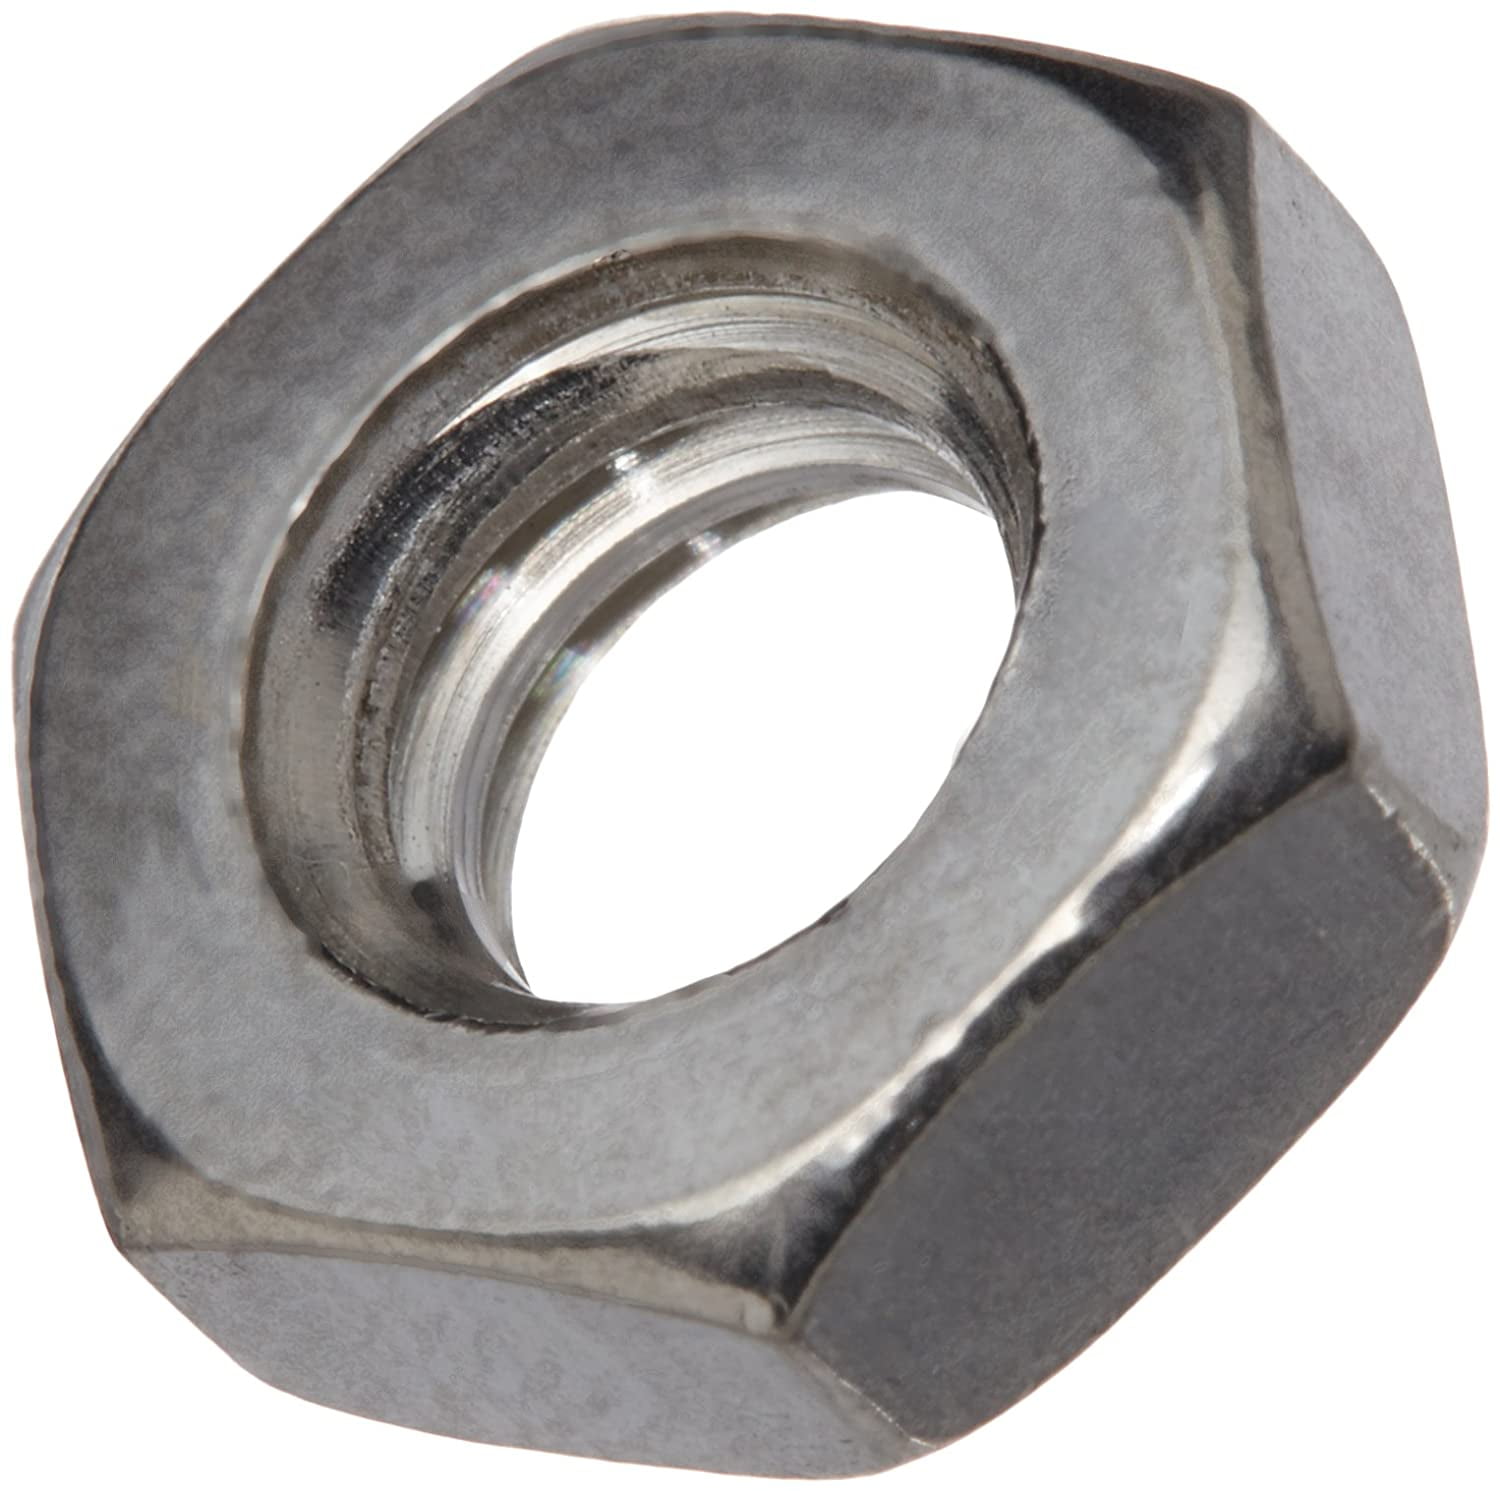 Grade 2 Steel ASME B18.2.2 1-1/2-6 Hex Nut Zinc Plated Finish Package of 5 Right Hand 